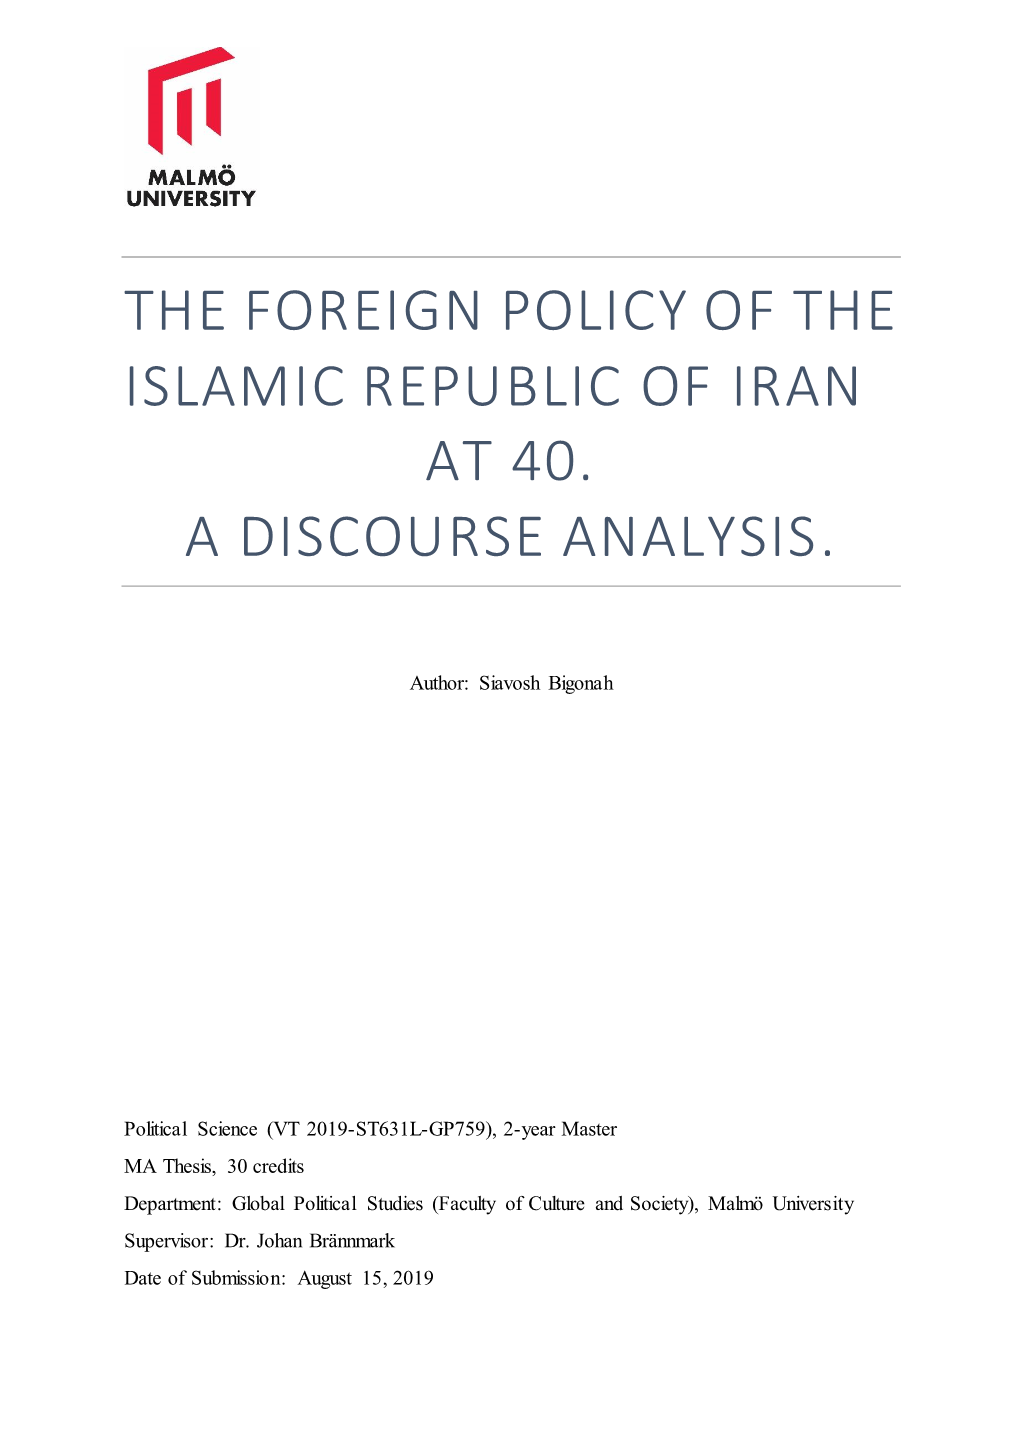 The Foreign Policy of the Islamic Republic of Iran at 40. a Discourse Analysis